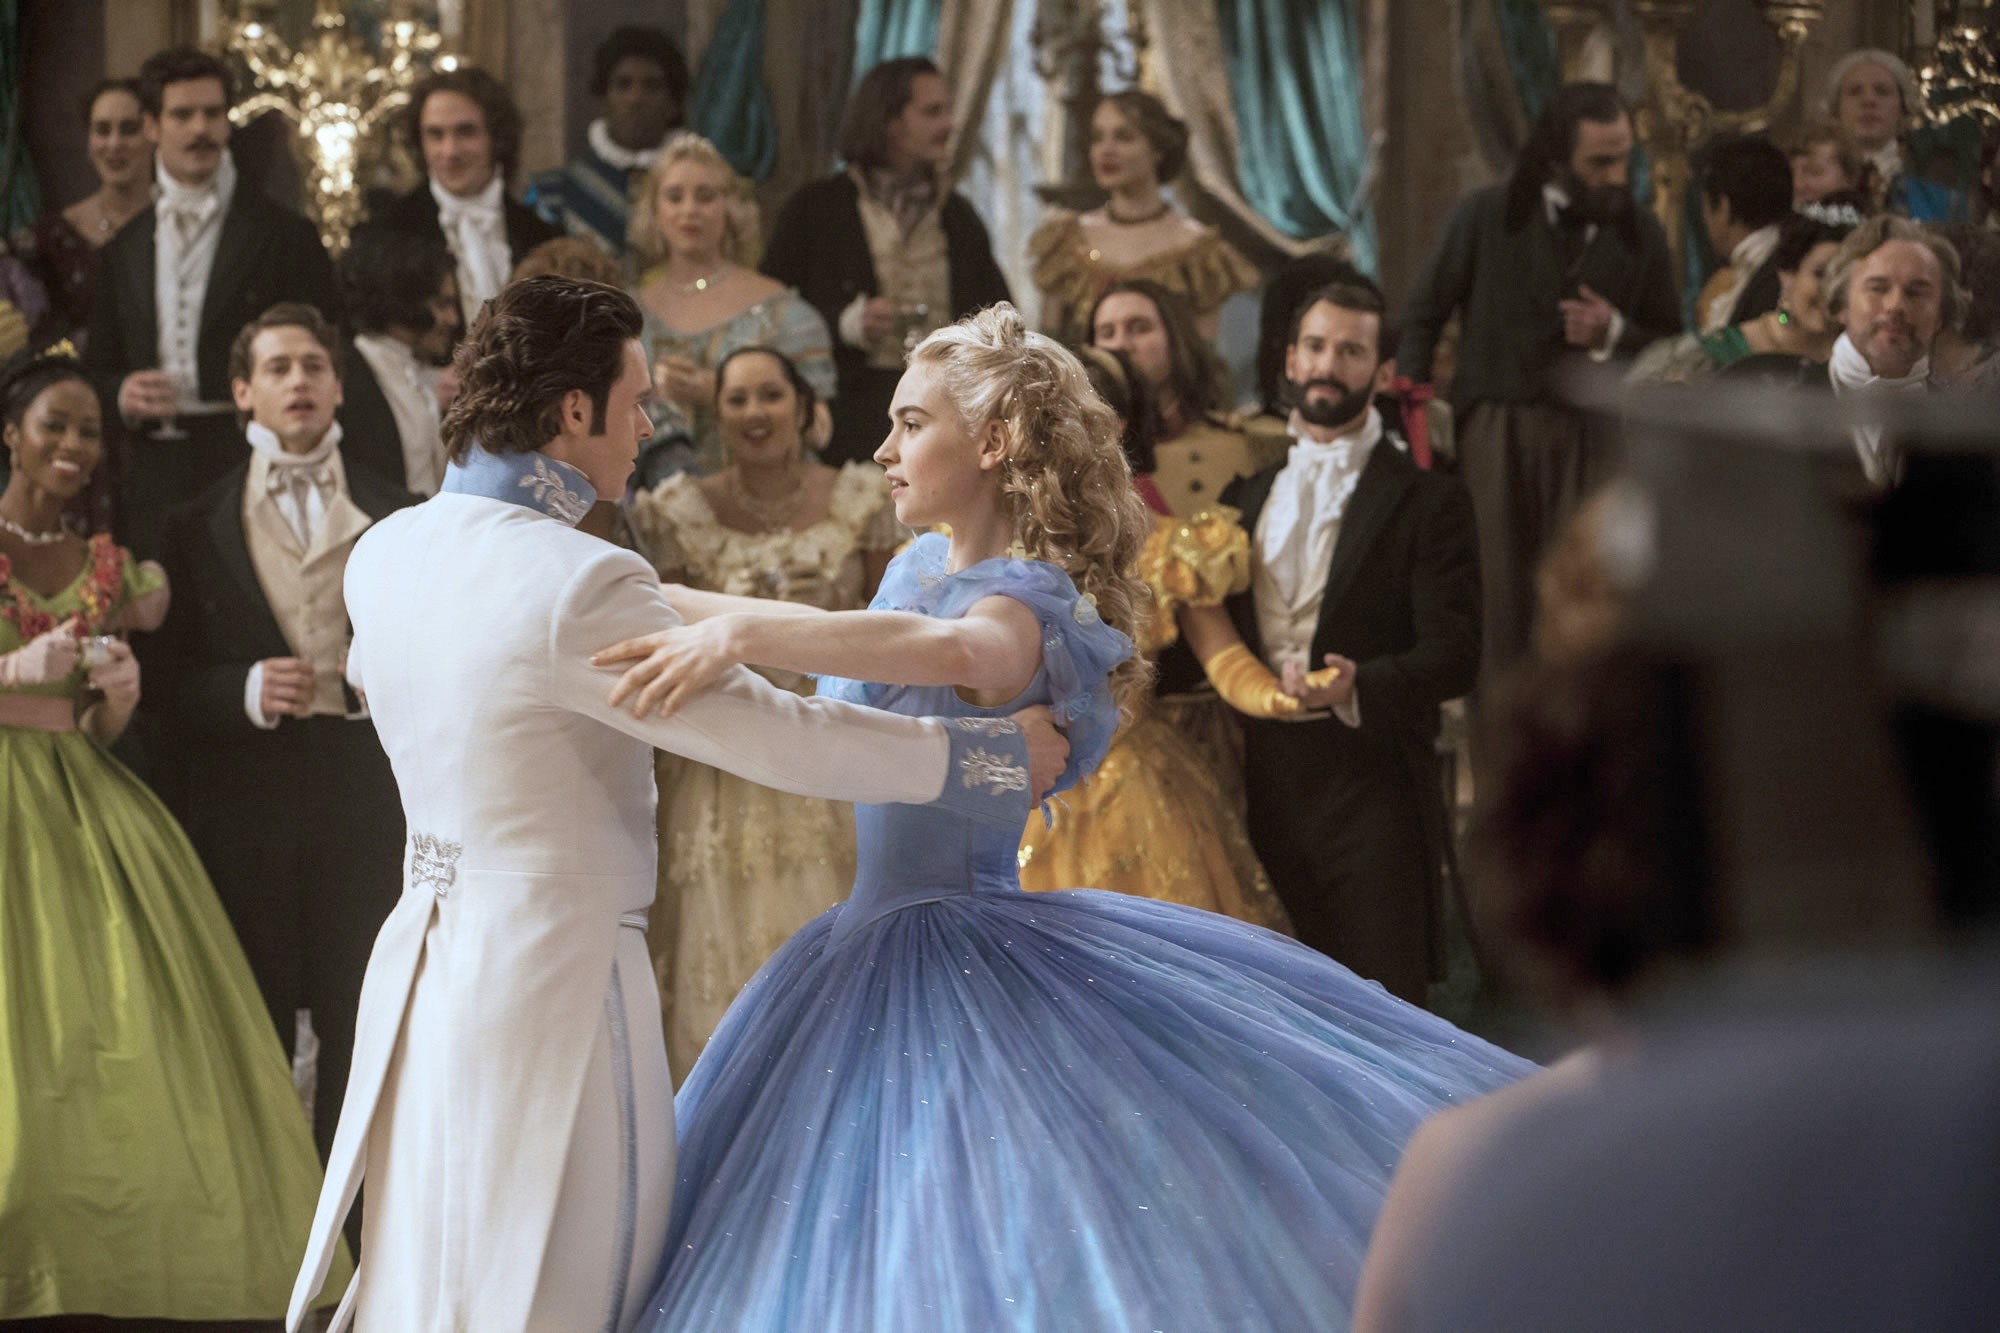 Richard Madden stars as Prince Charming and Lily James stars as Cinderella in Walt Disney Pictures' Cinderella (2015). Photo credit by Jonathan Olley.